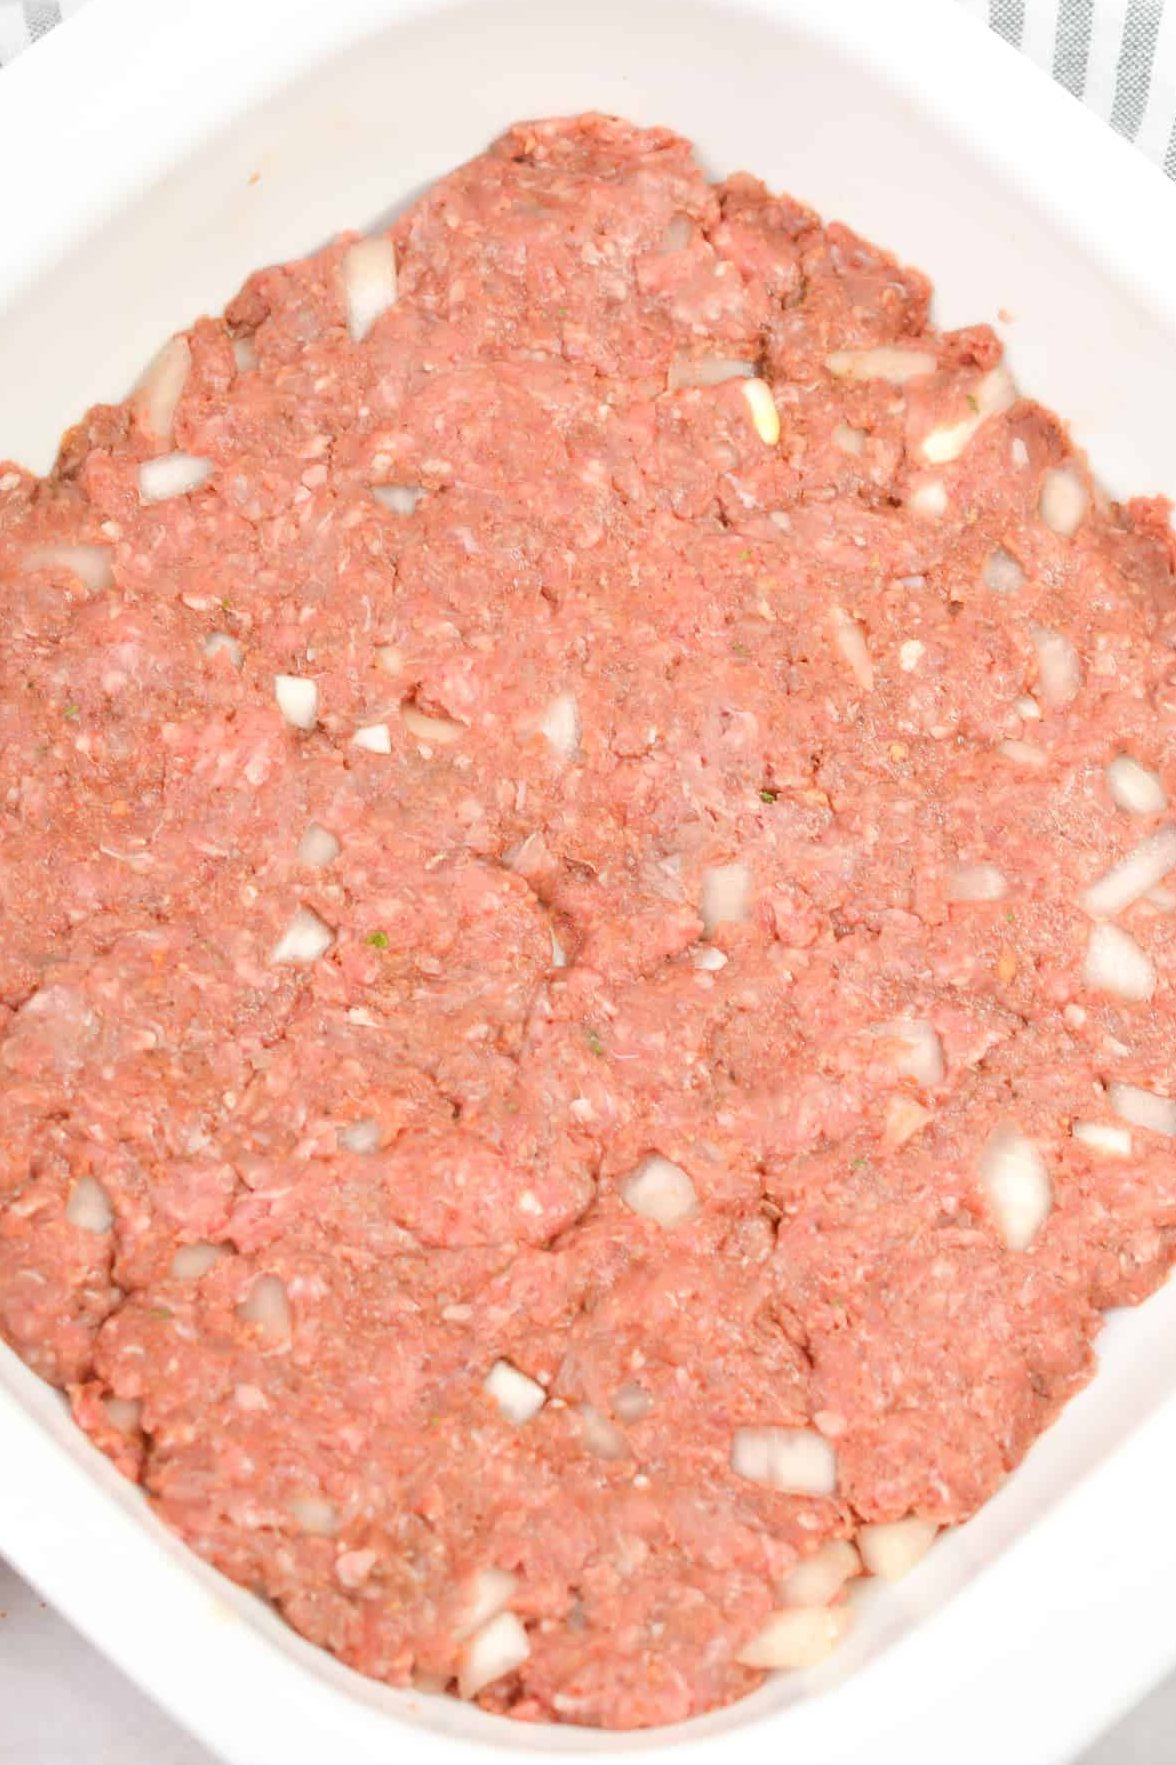 Press the meat mixture into a 9x9 well-greased baking dish.